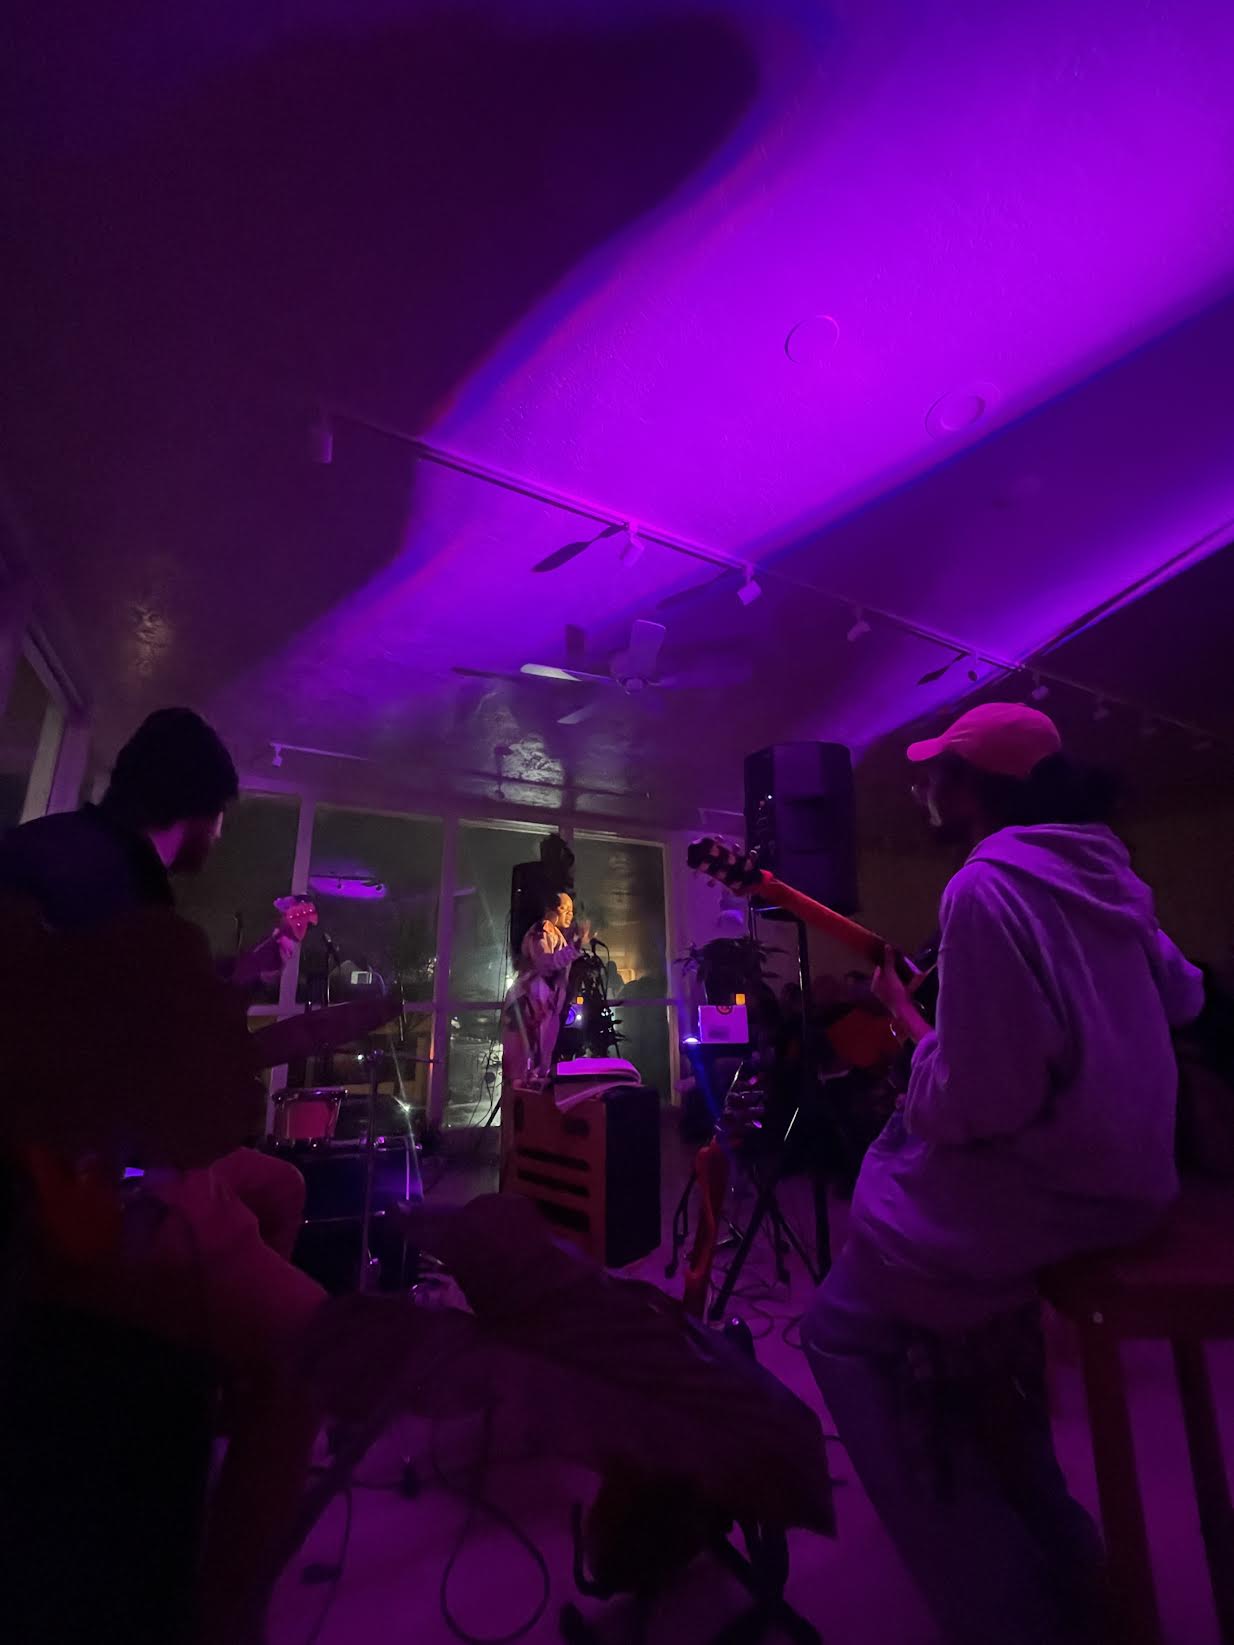 Purple mood lighting sets the tone as a live band plays during an Out The Way on J event.